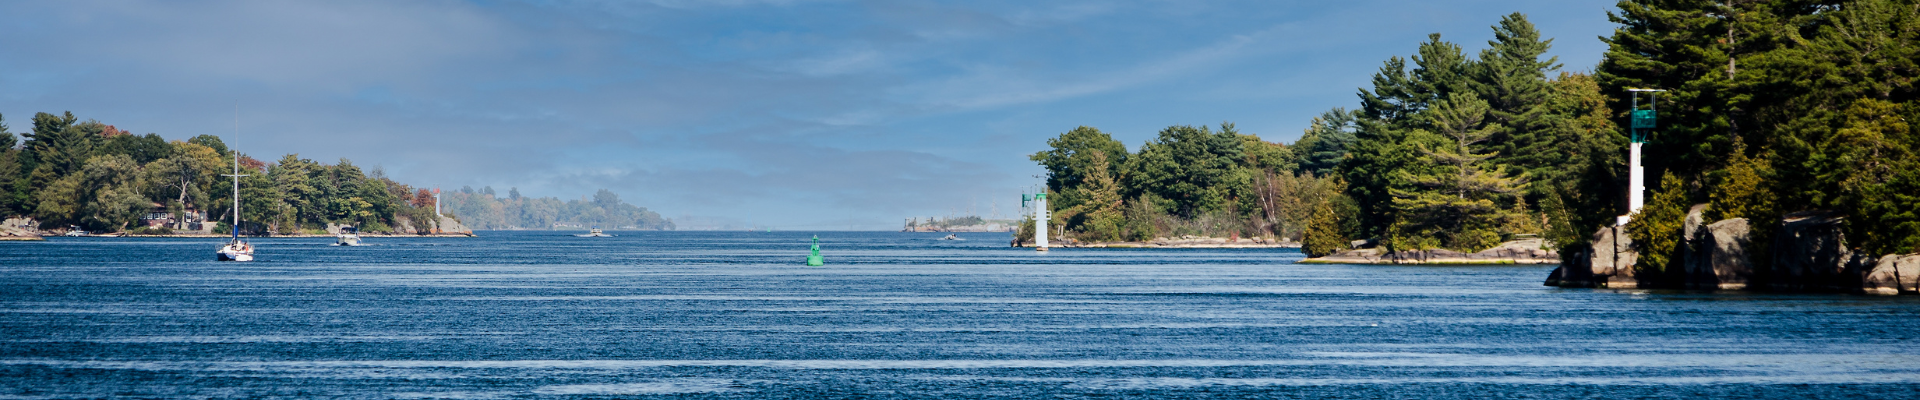 Photo taken looking downriver towards Brockville, between islands in the Saint Lawrence River. Rocky outcroppings jut into the water and host small lighthouses. A green channel marker separates the channel